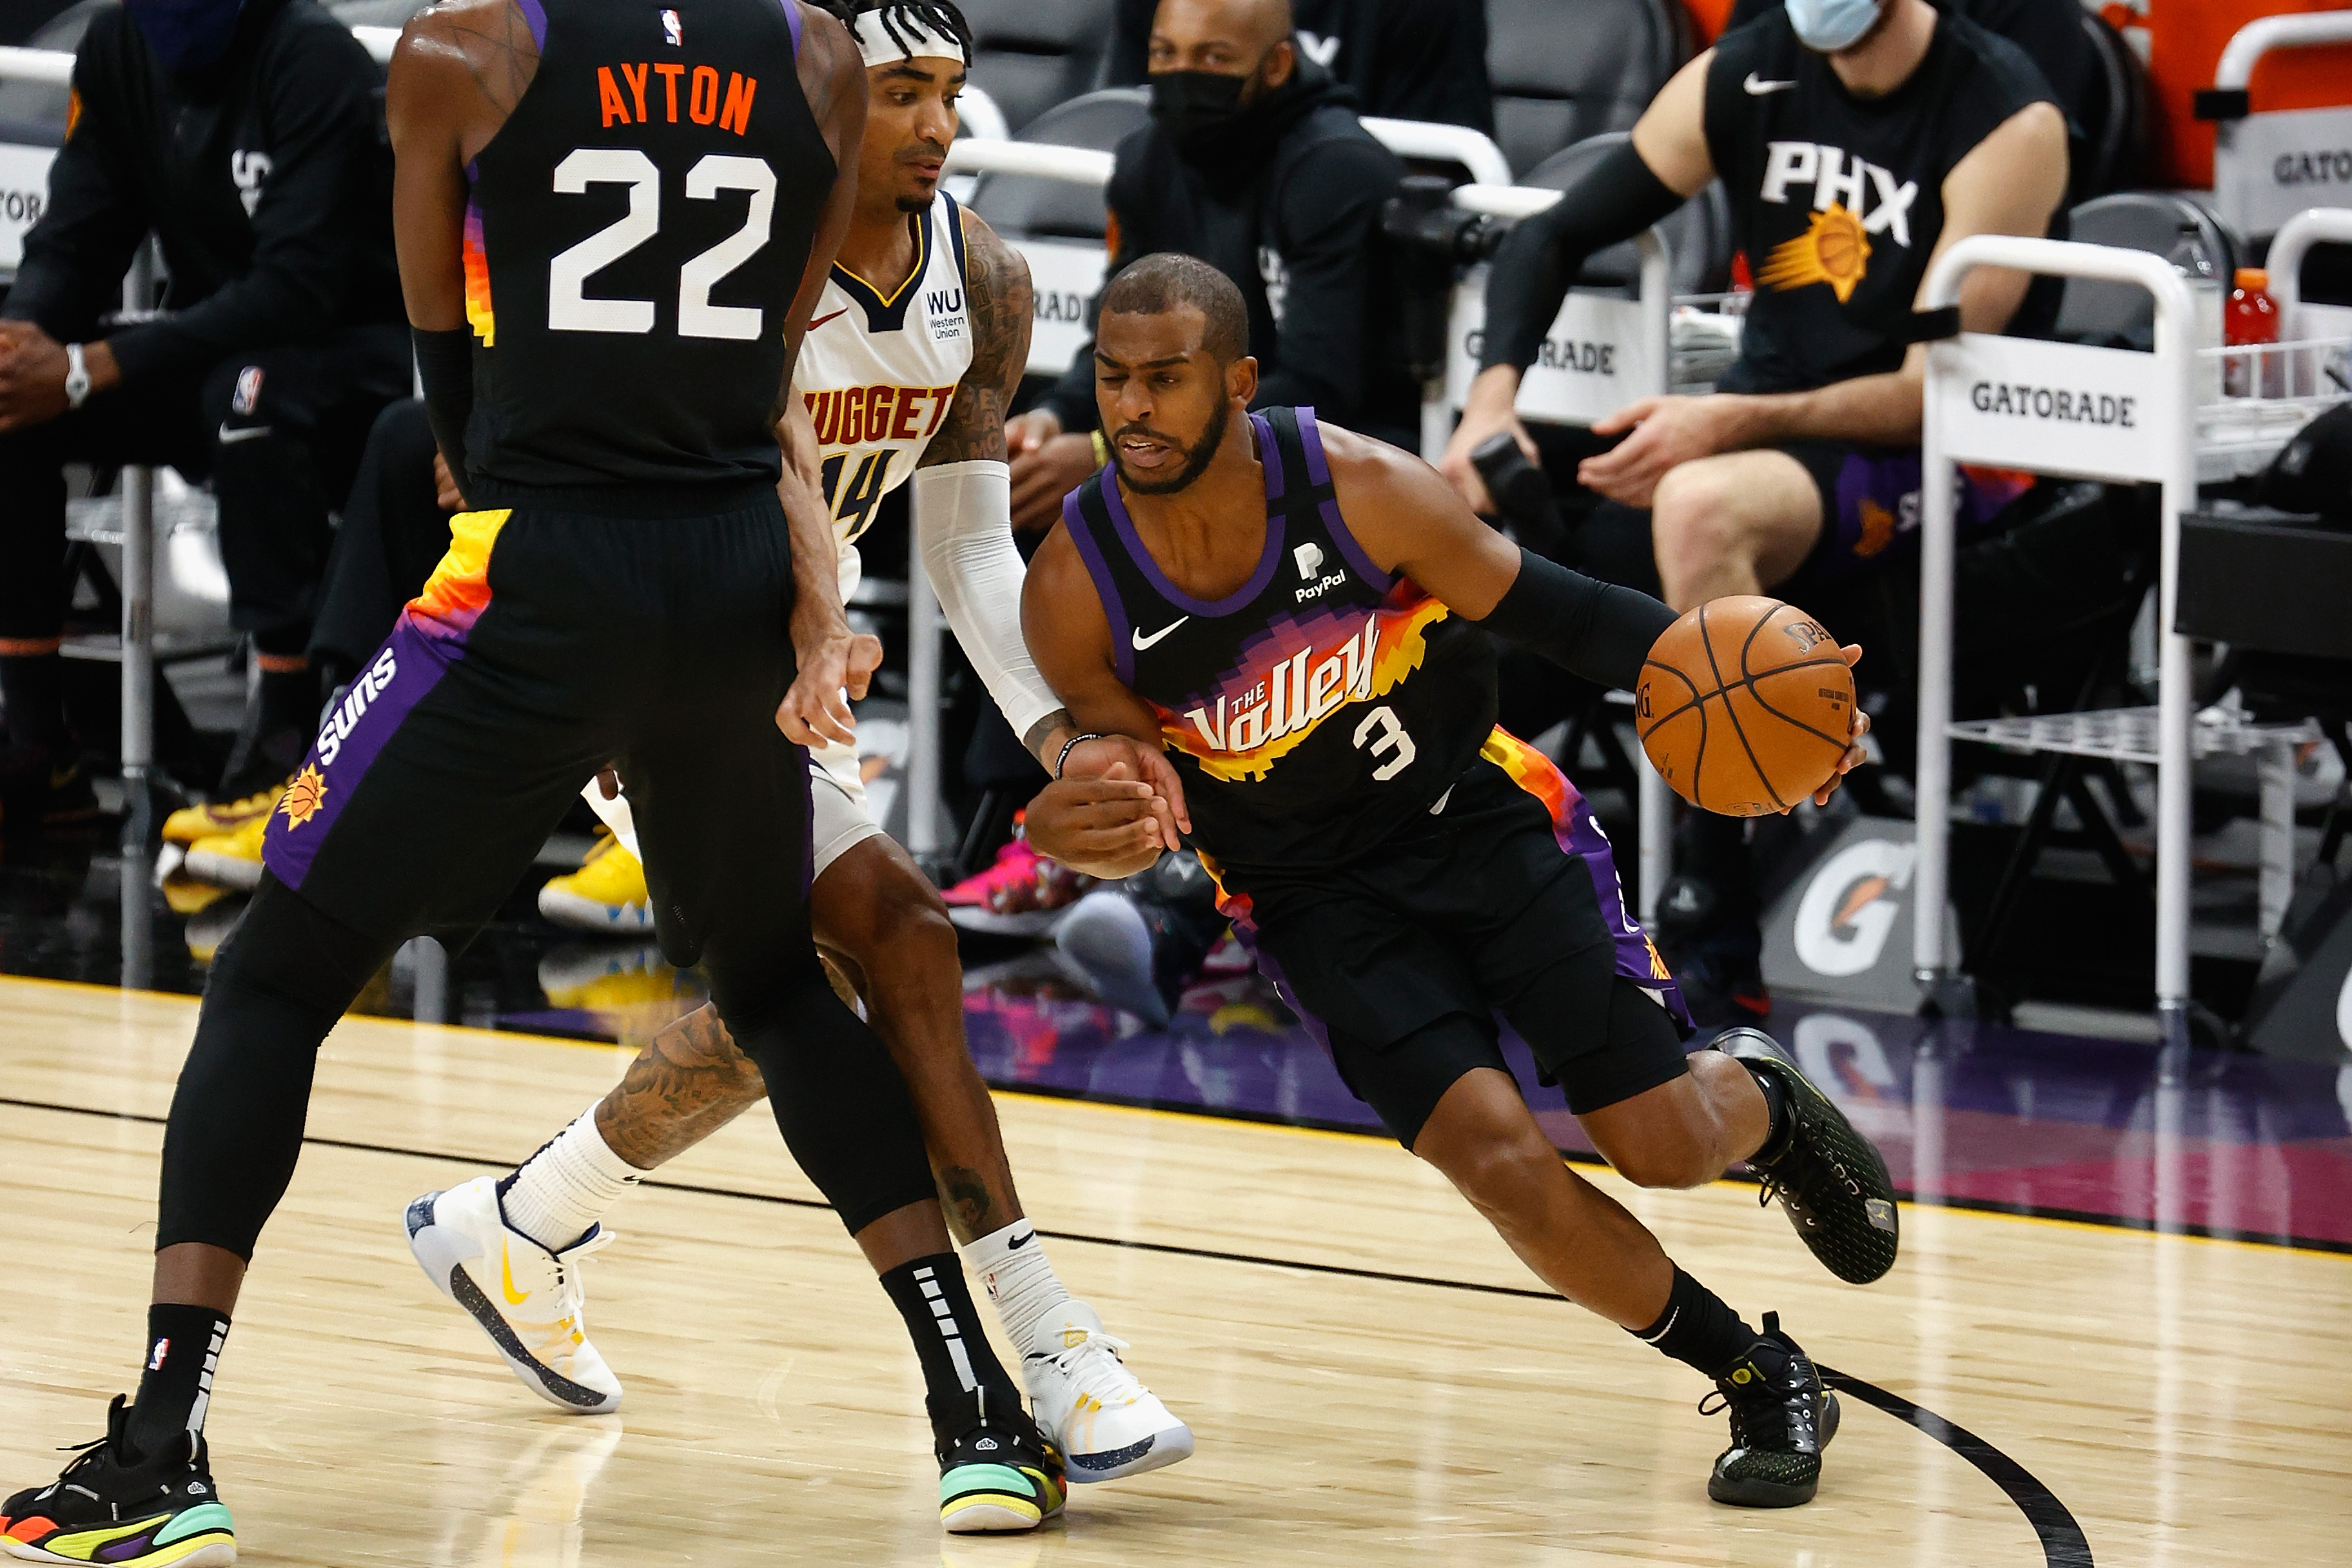 Phoenix Suns at Denver Nuggets Game 3 free live stream (6/11/21) How to watch NBA, time, channel